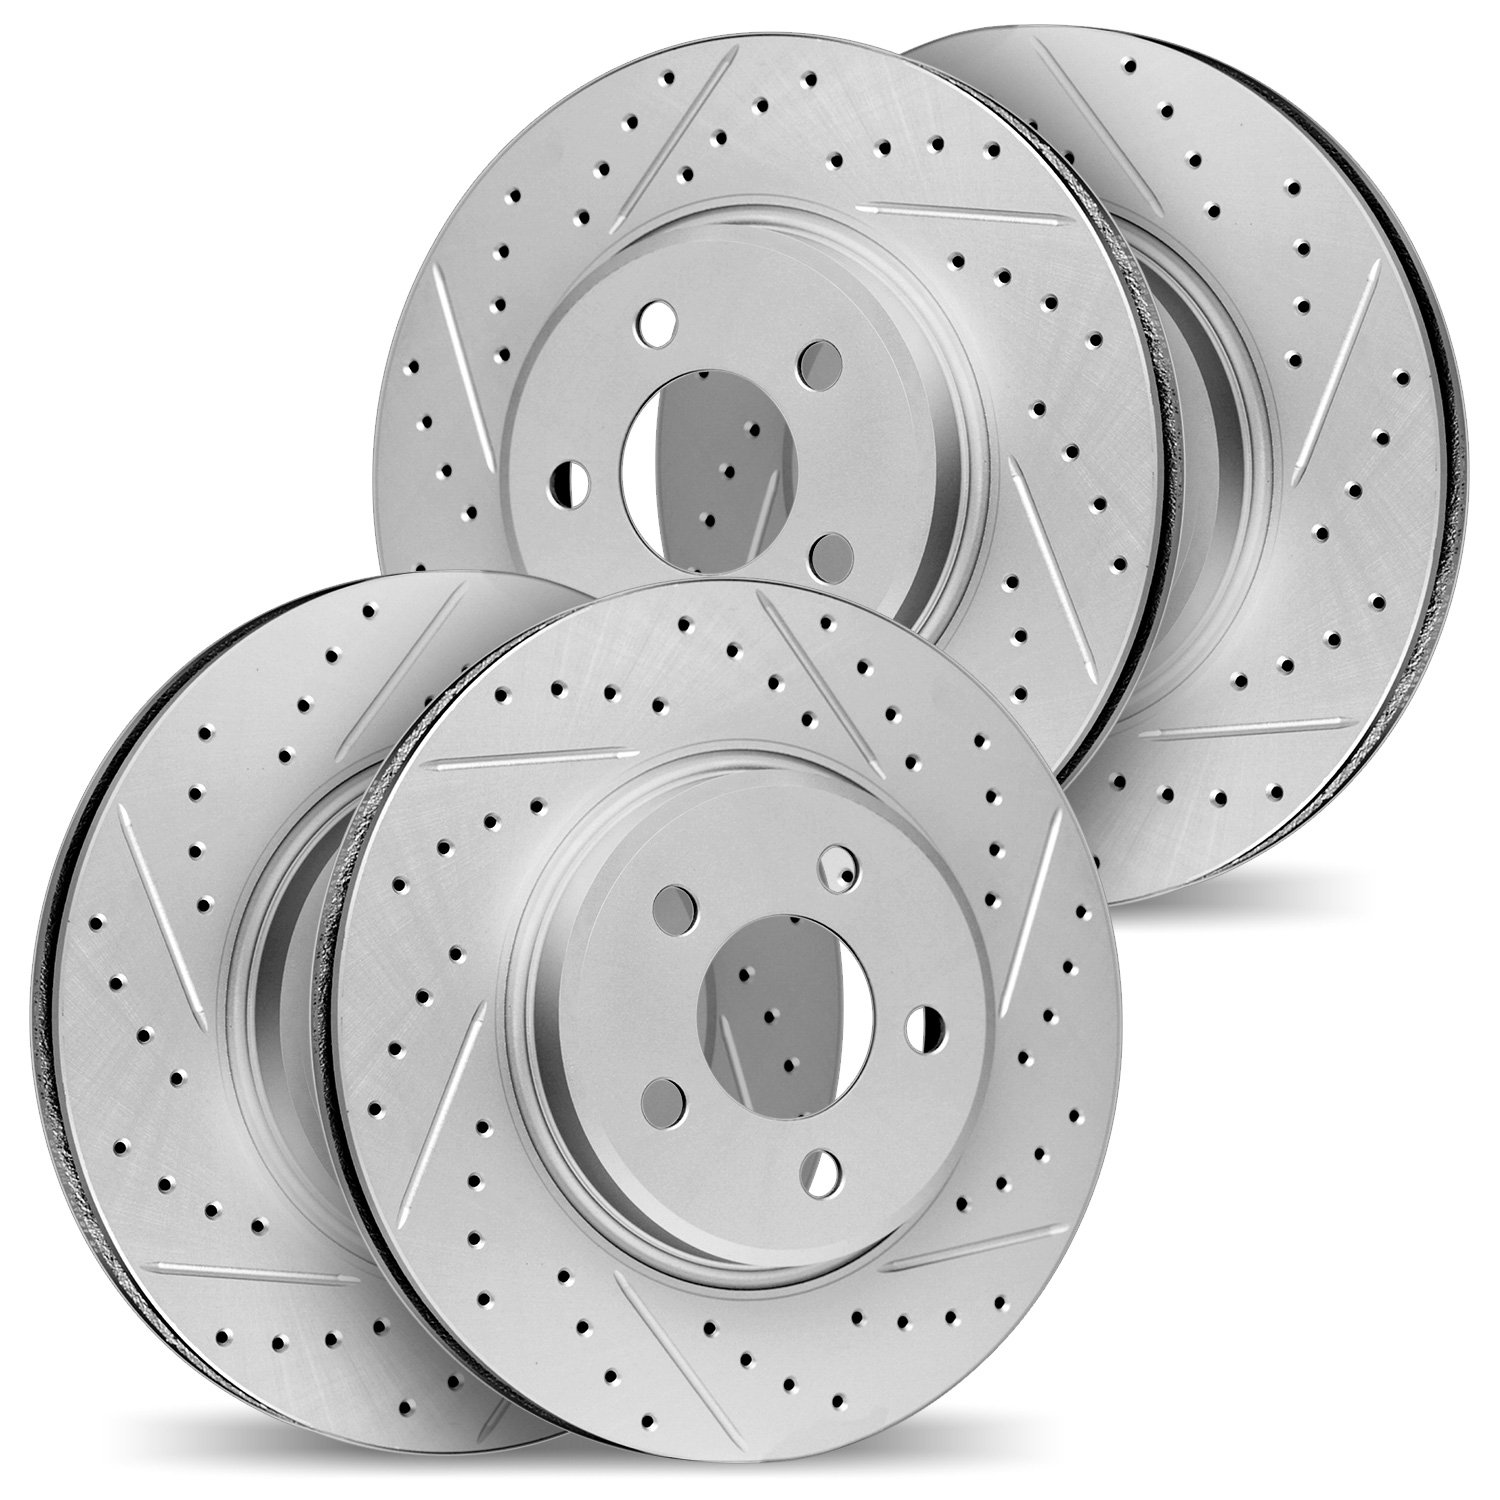 2004-21011 Geoperformance Drilled/Slotted Brake Rotors, 2007-2009 Kia/Hyundai/Genesis, Position: Front and Rear